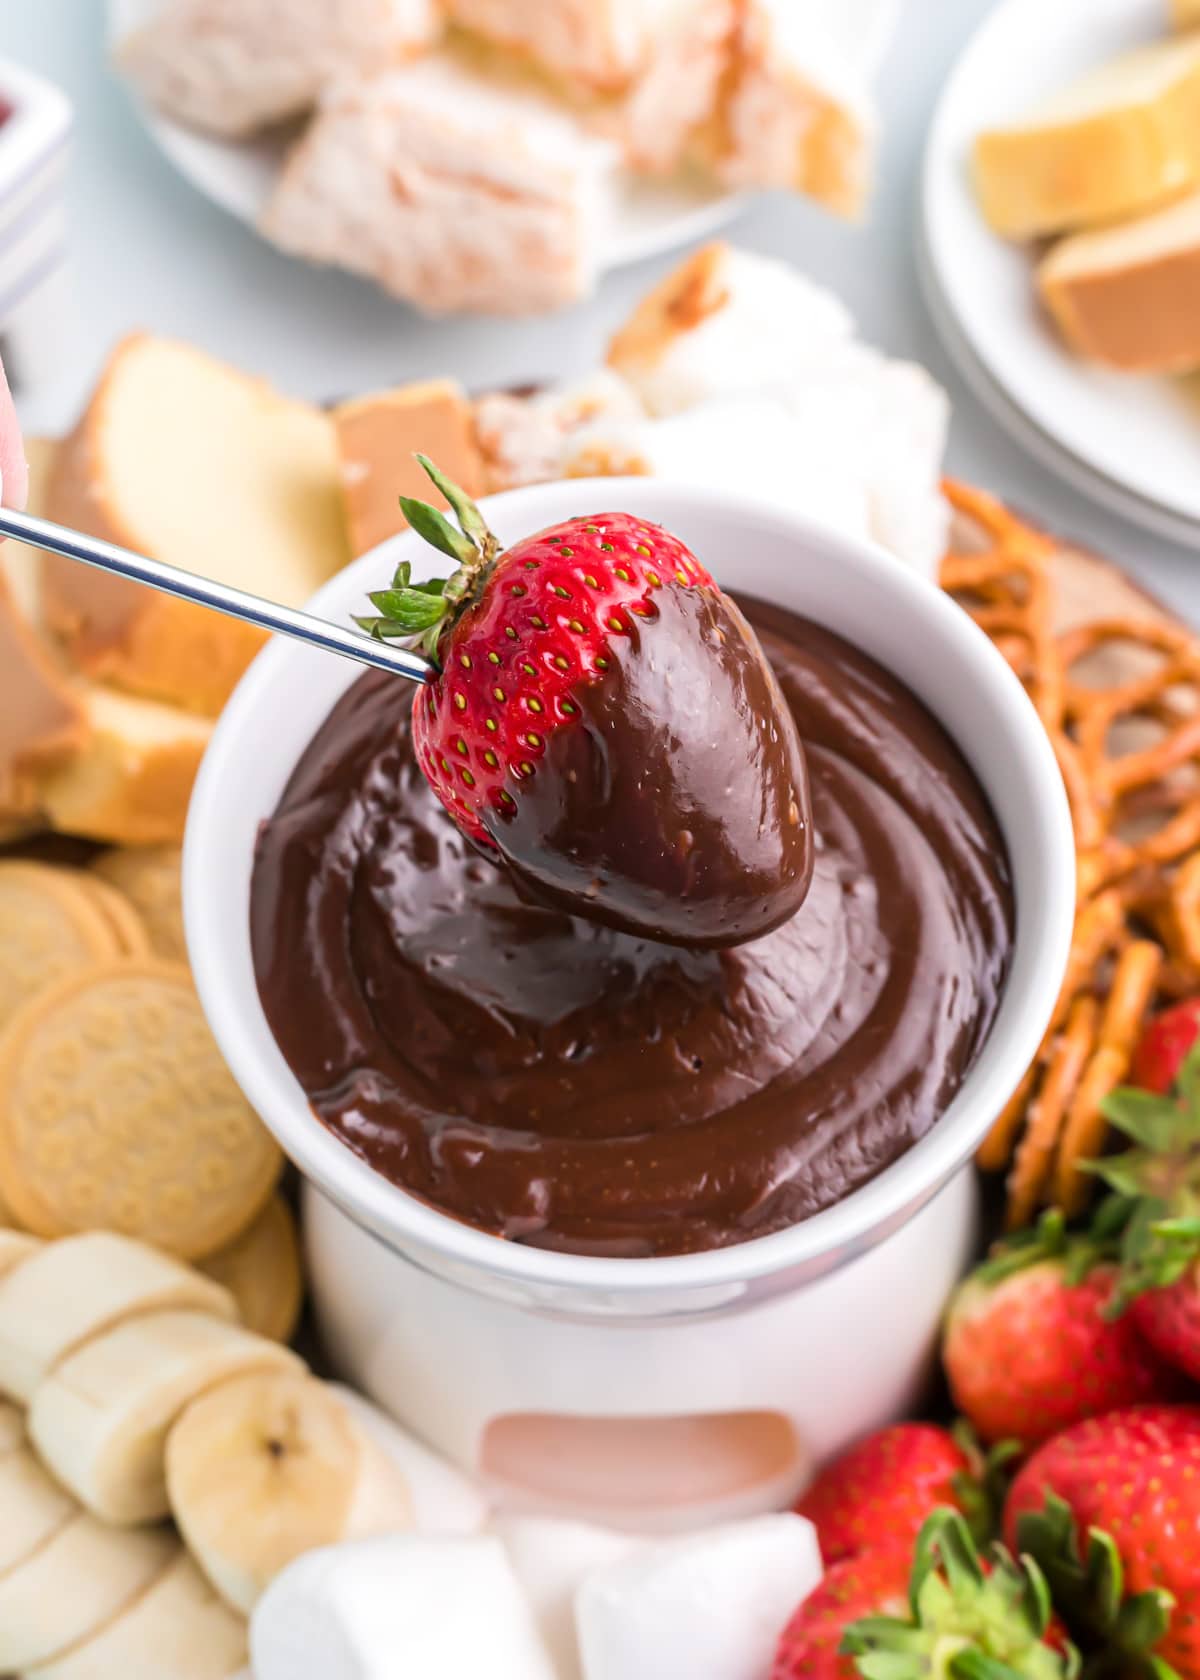 Dipping a fresh strawberry in a pot of chocolate fondue.